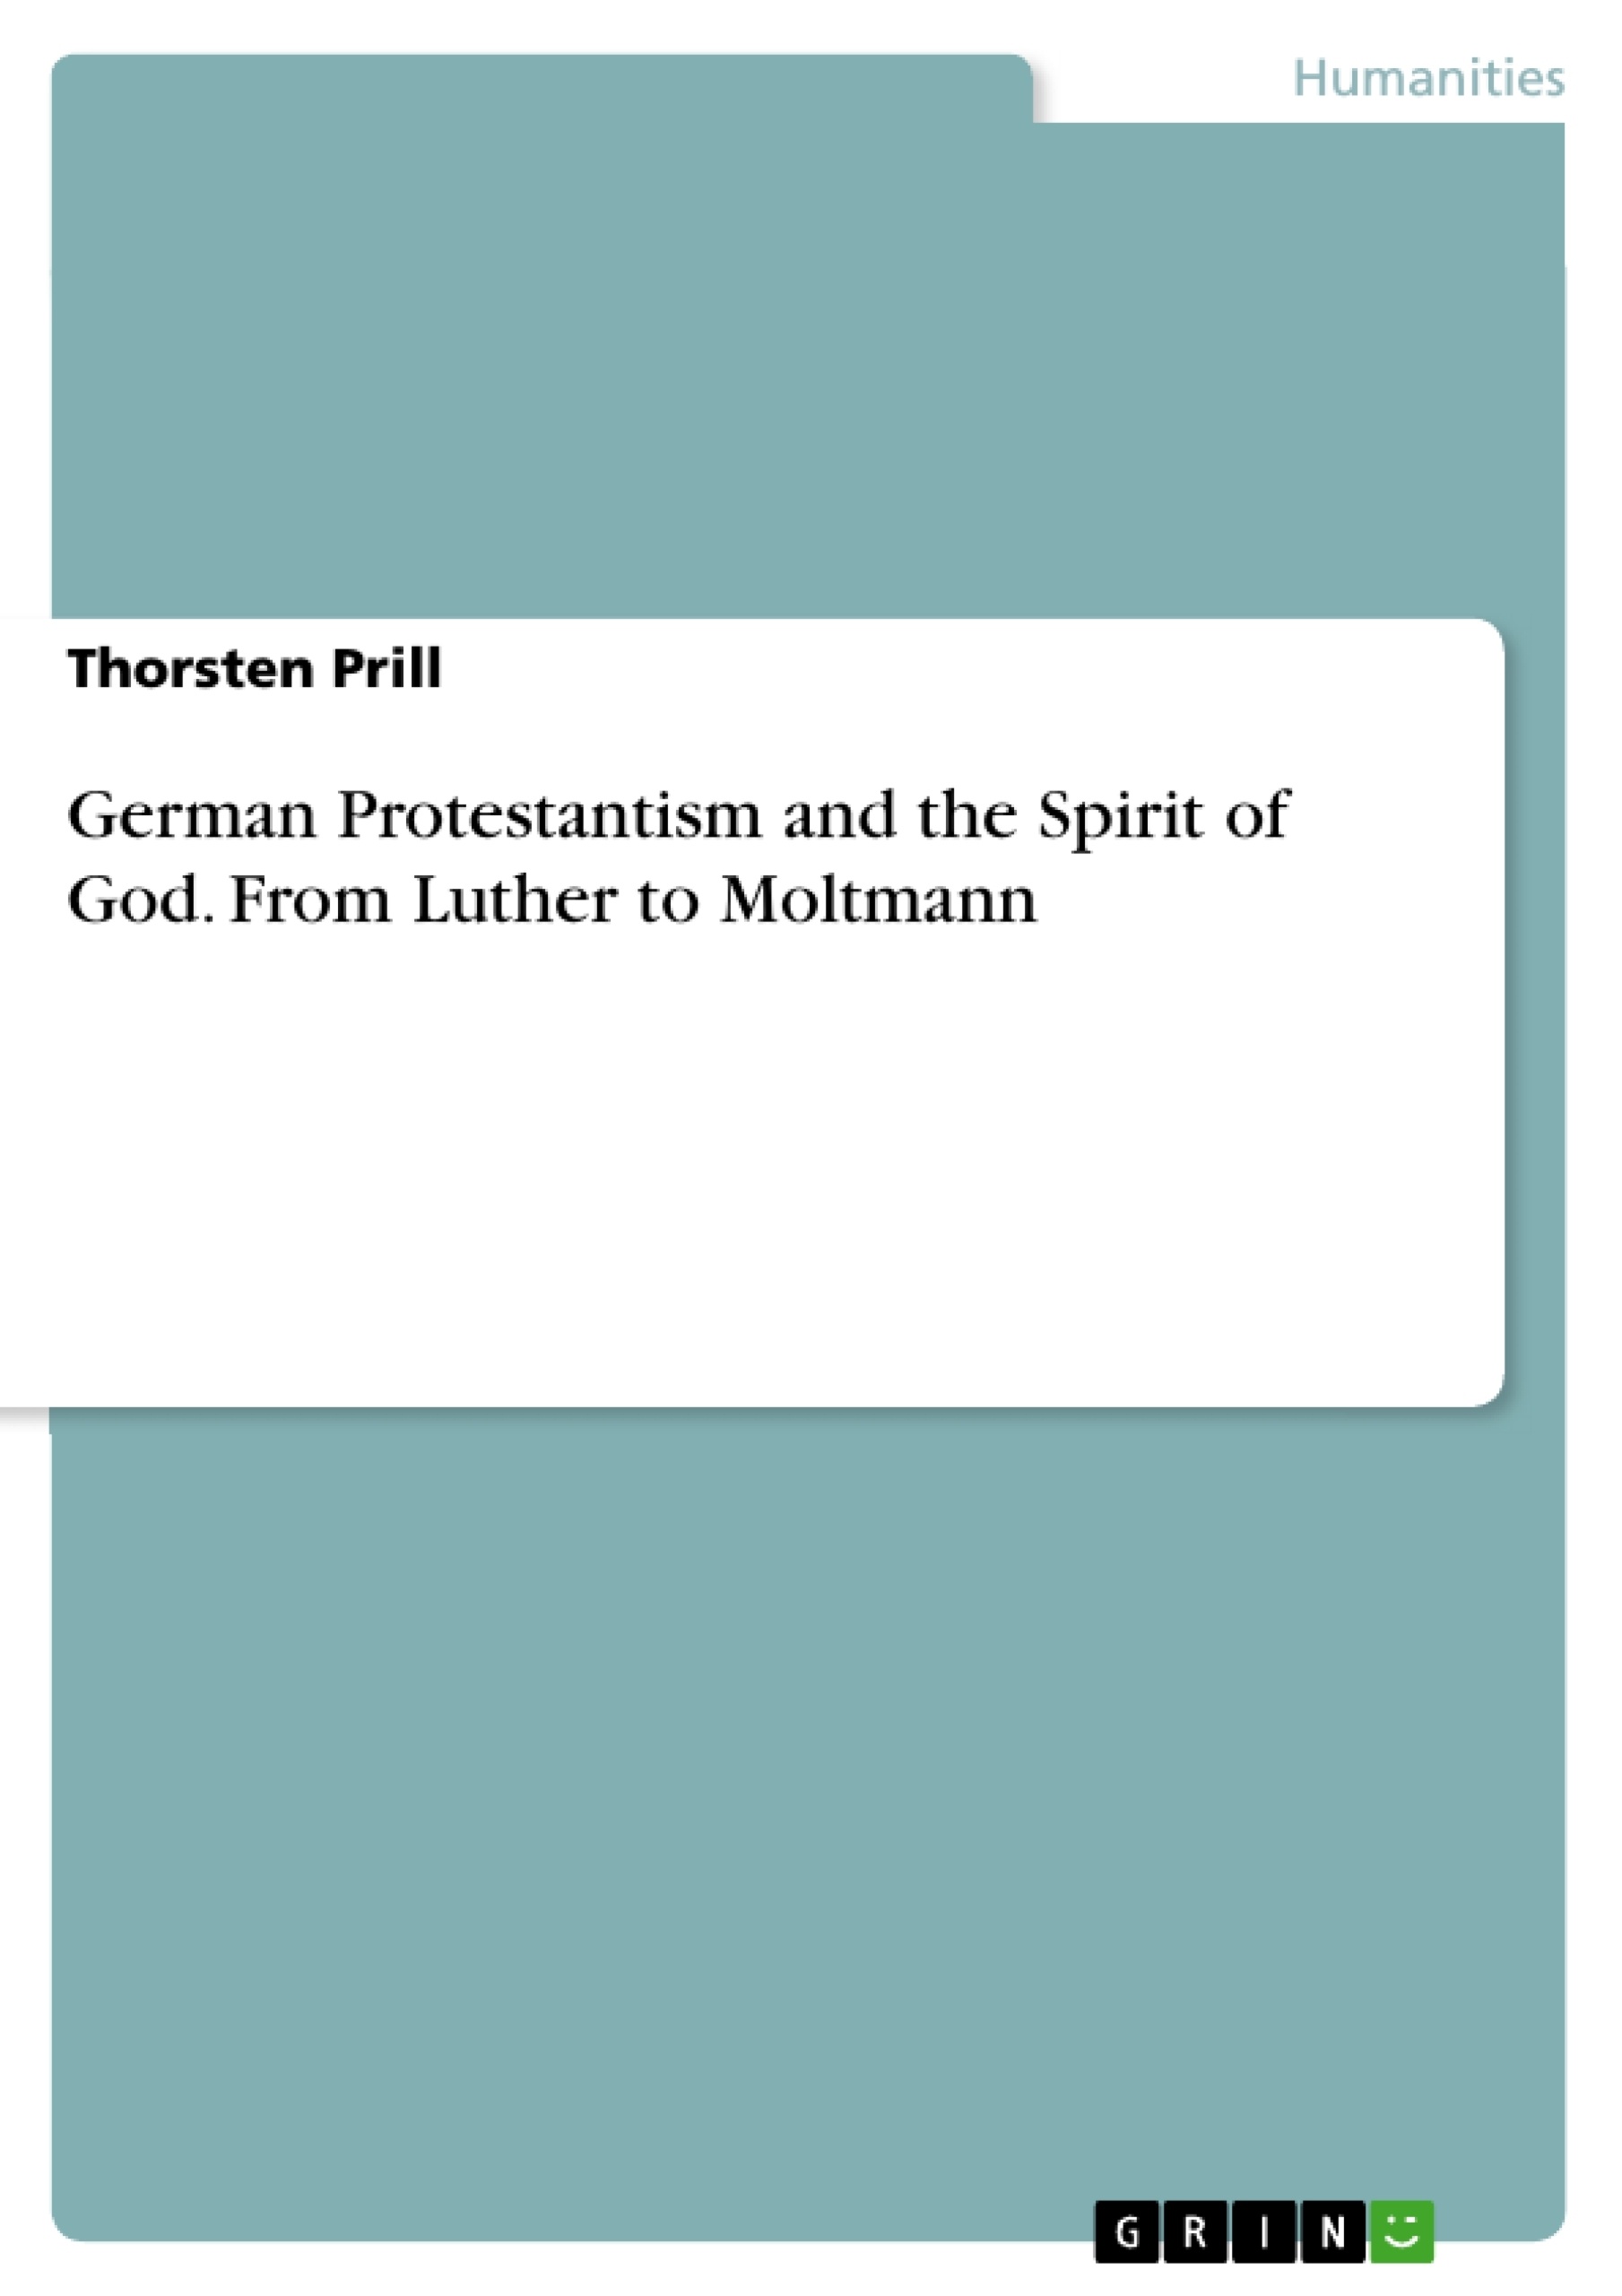 Titre: German Protestantism and the Spirit of God. From Luther to Moltmann